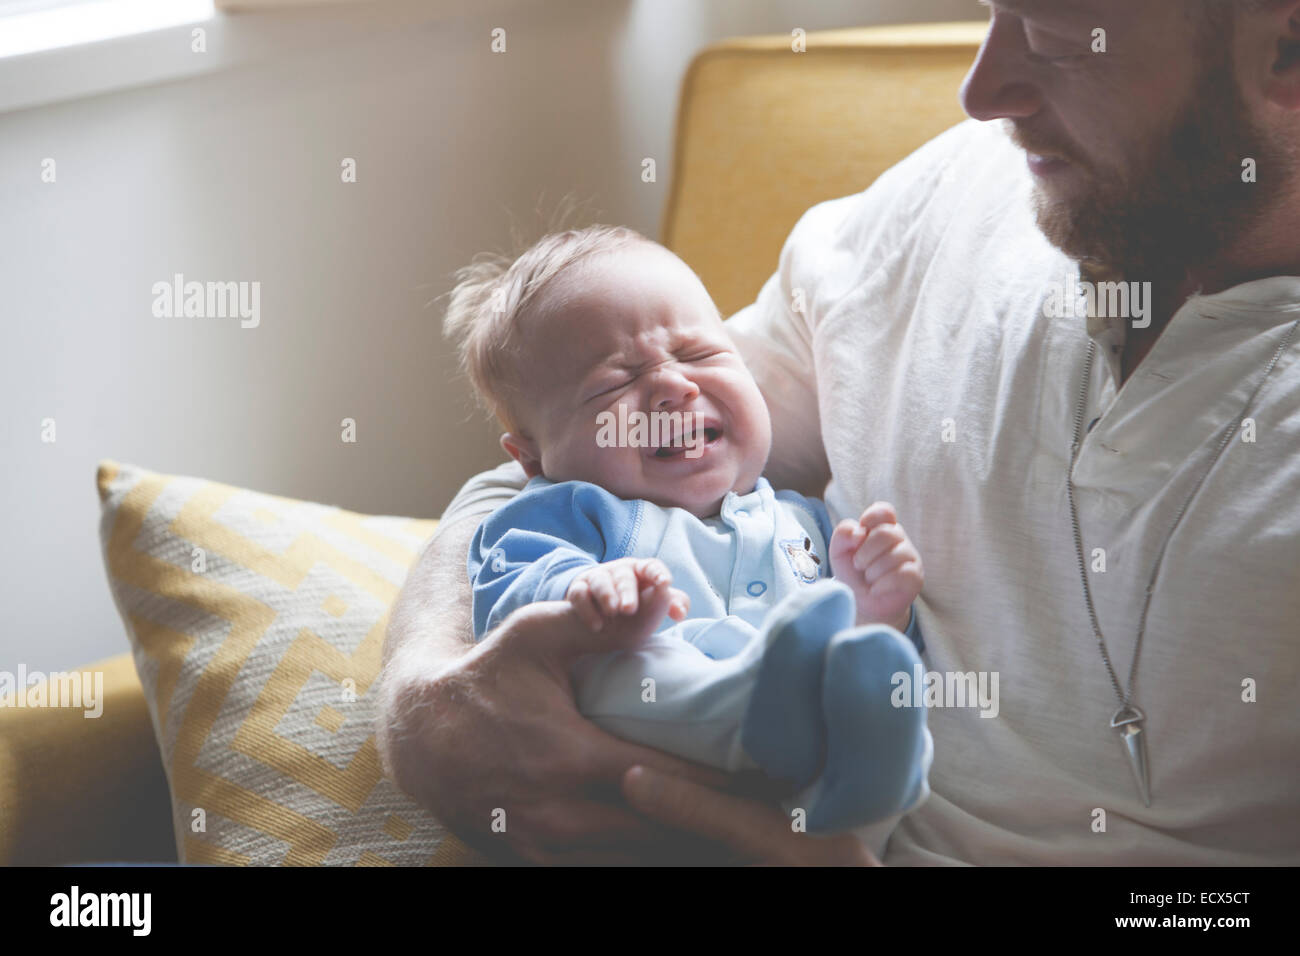 Father holding and looking at crying baby, sitting on sofa Stock Photo